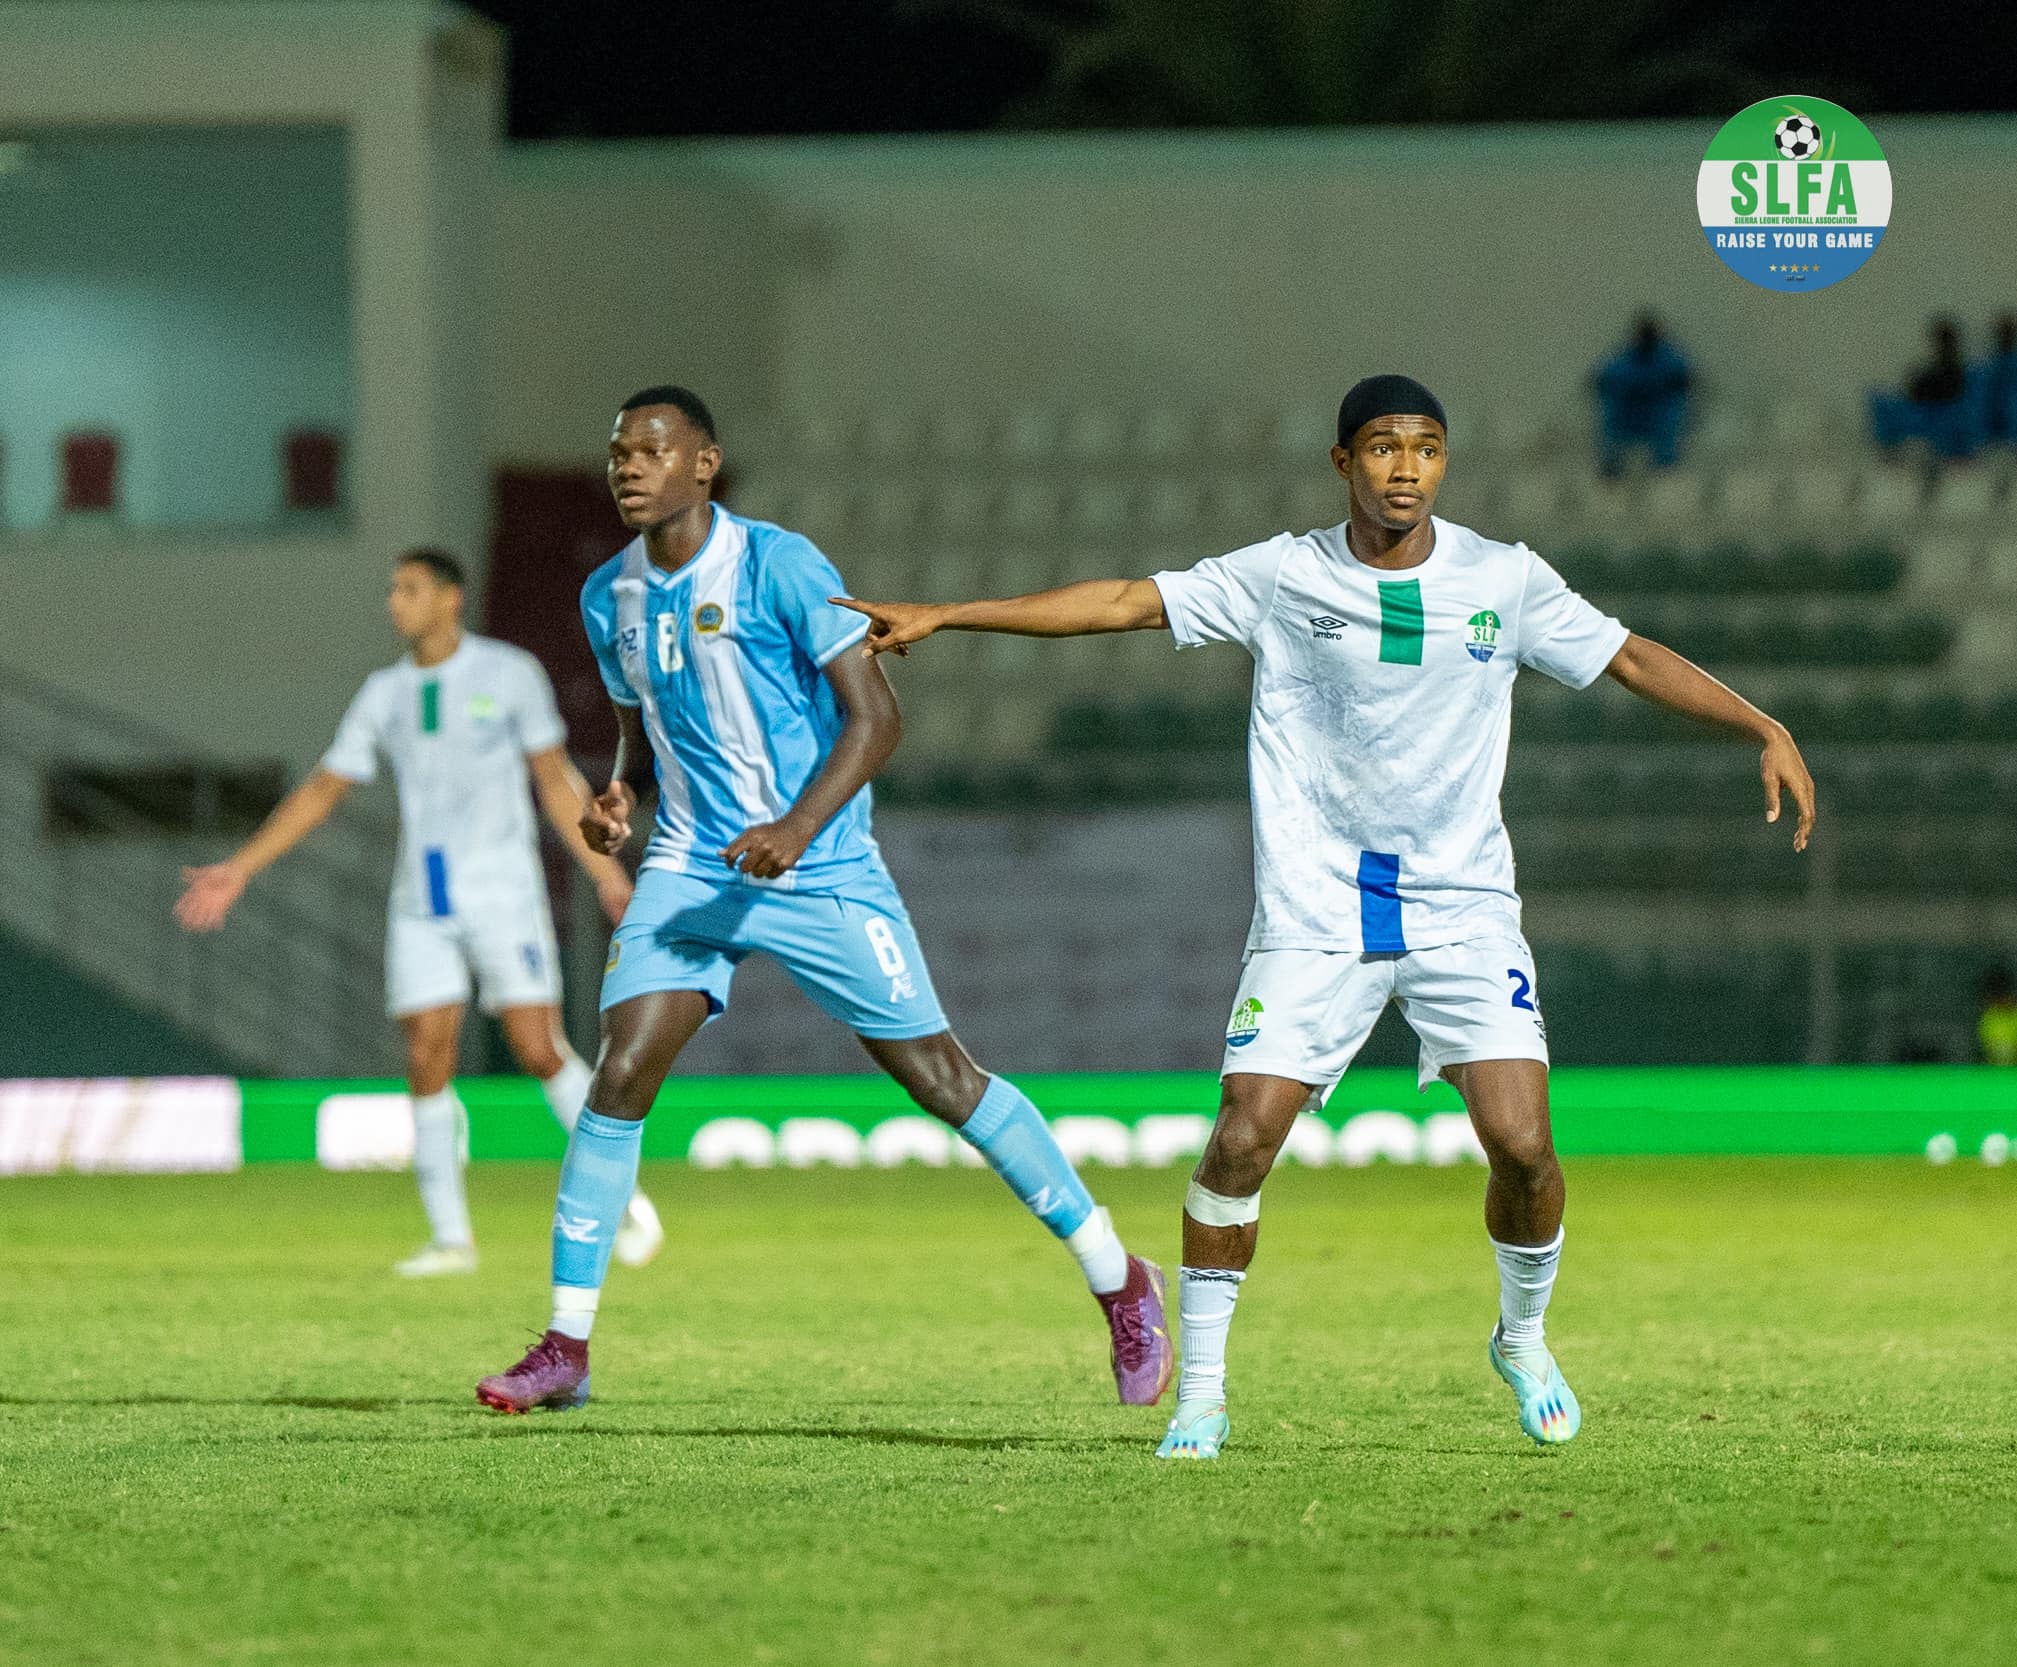 Salliue Bah in action for Sierra Leone during their 2-0 win over Somalia in at the Stade de Berrechid in Casablanca.